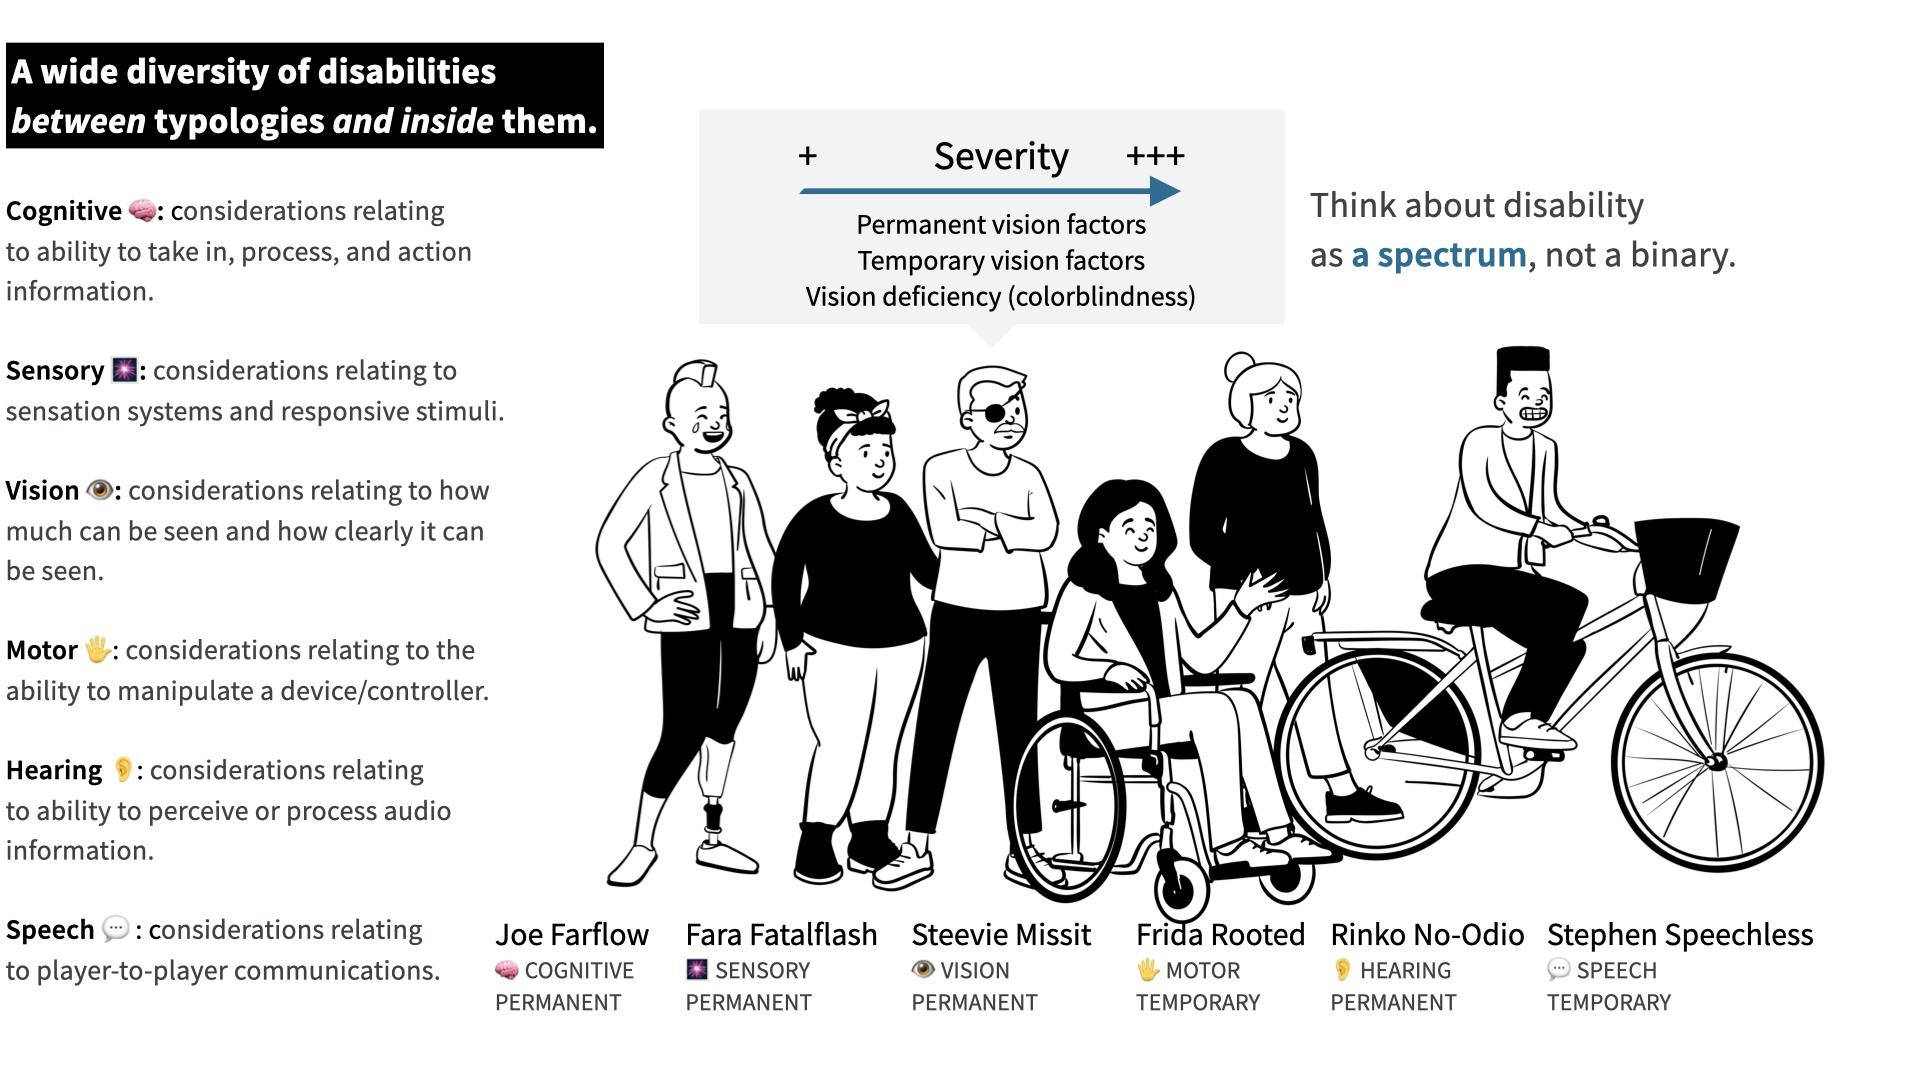 A visual representation and description of different people with disabilities.